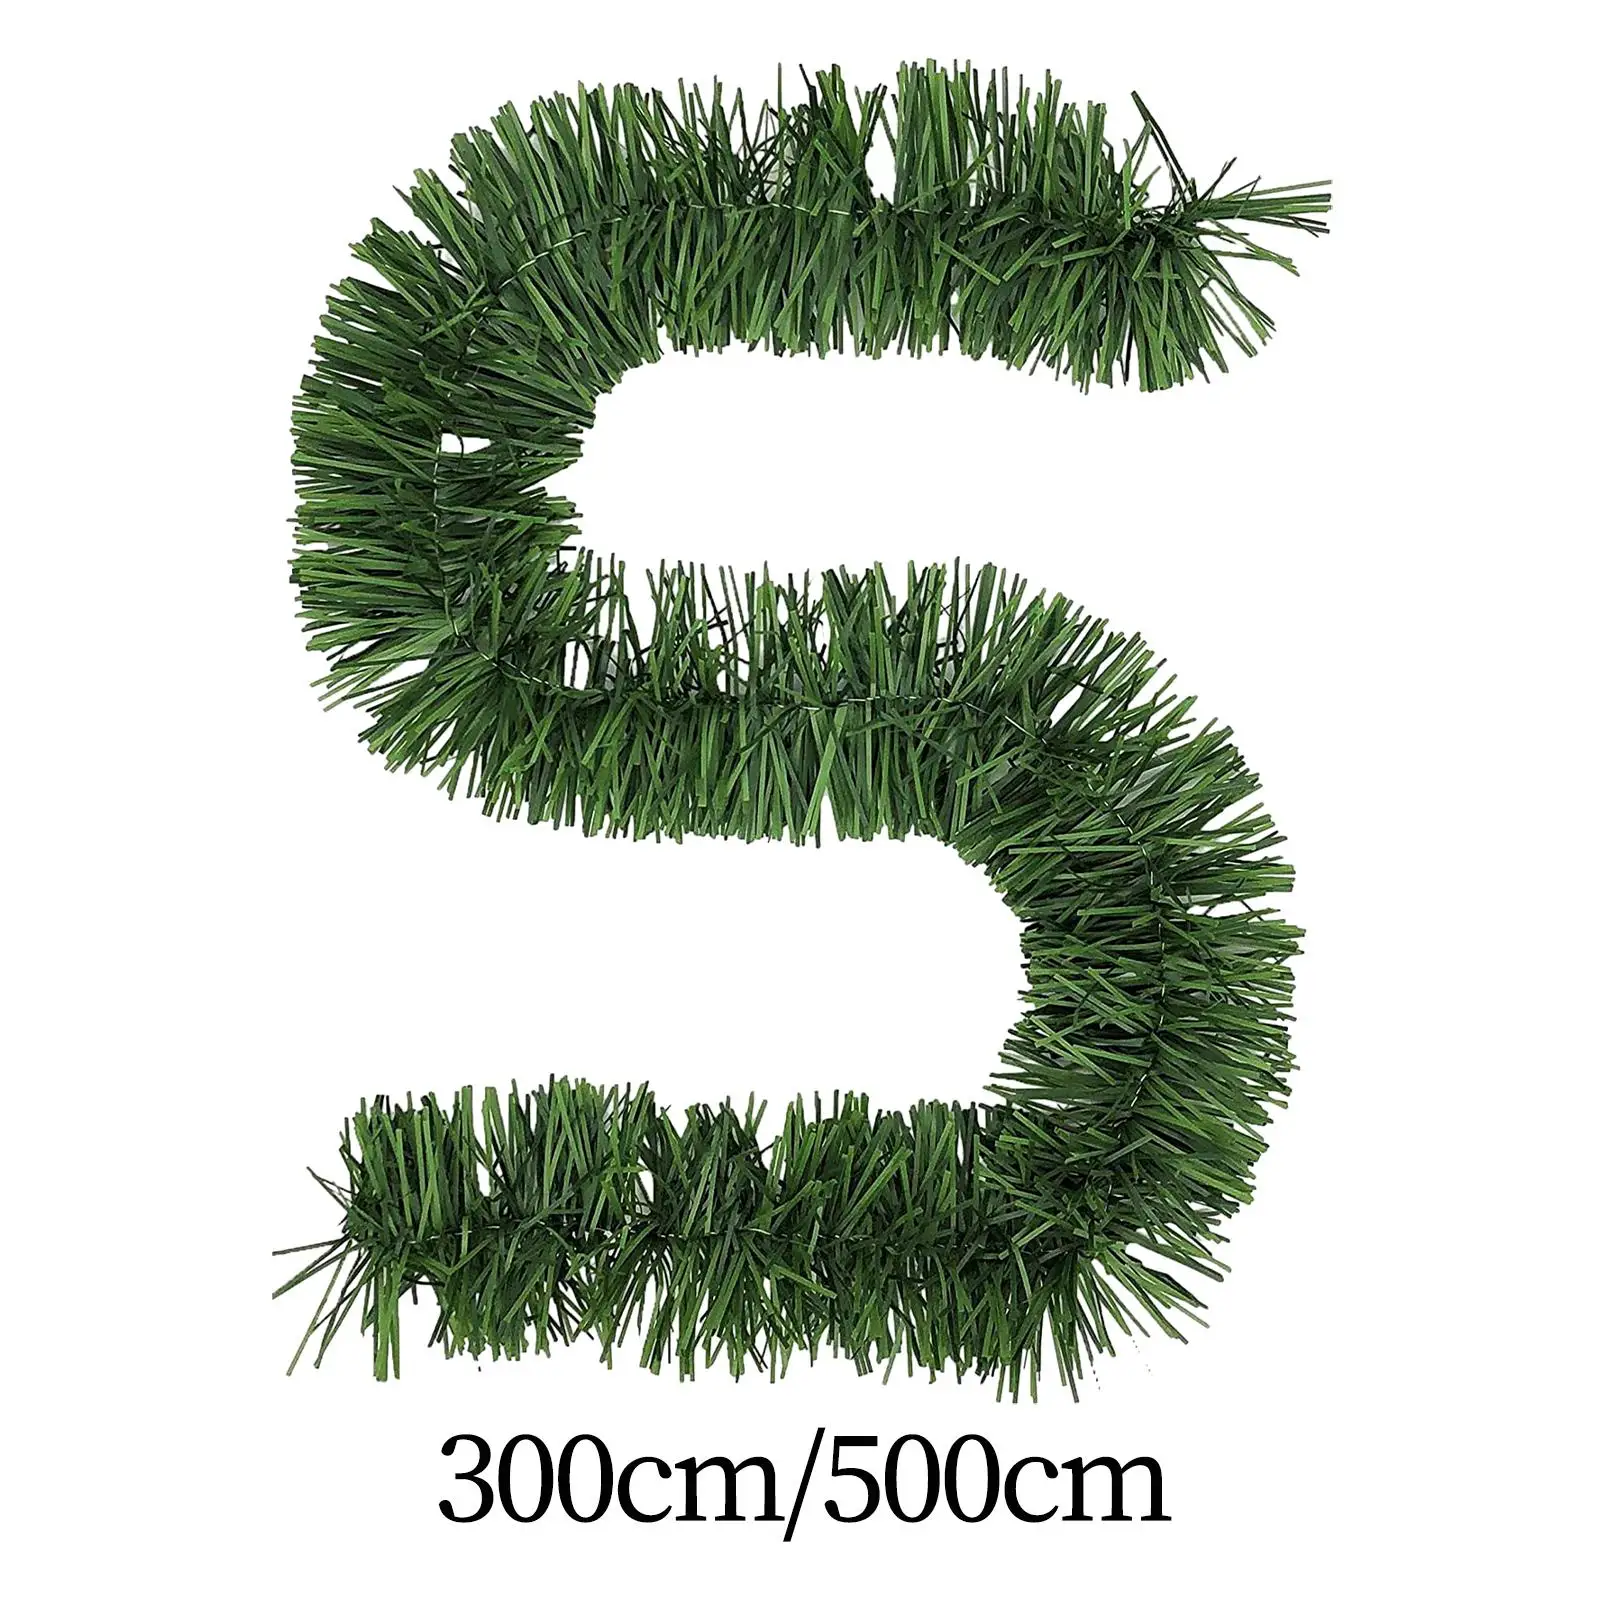 Artificial Christmas Garland, Holiday Green Garland Christmas Decorations, Artificial Xmas Garland for Mantel Outside Decor